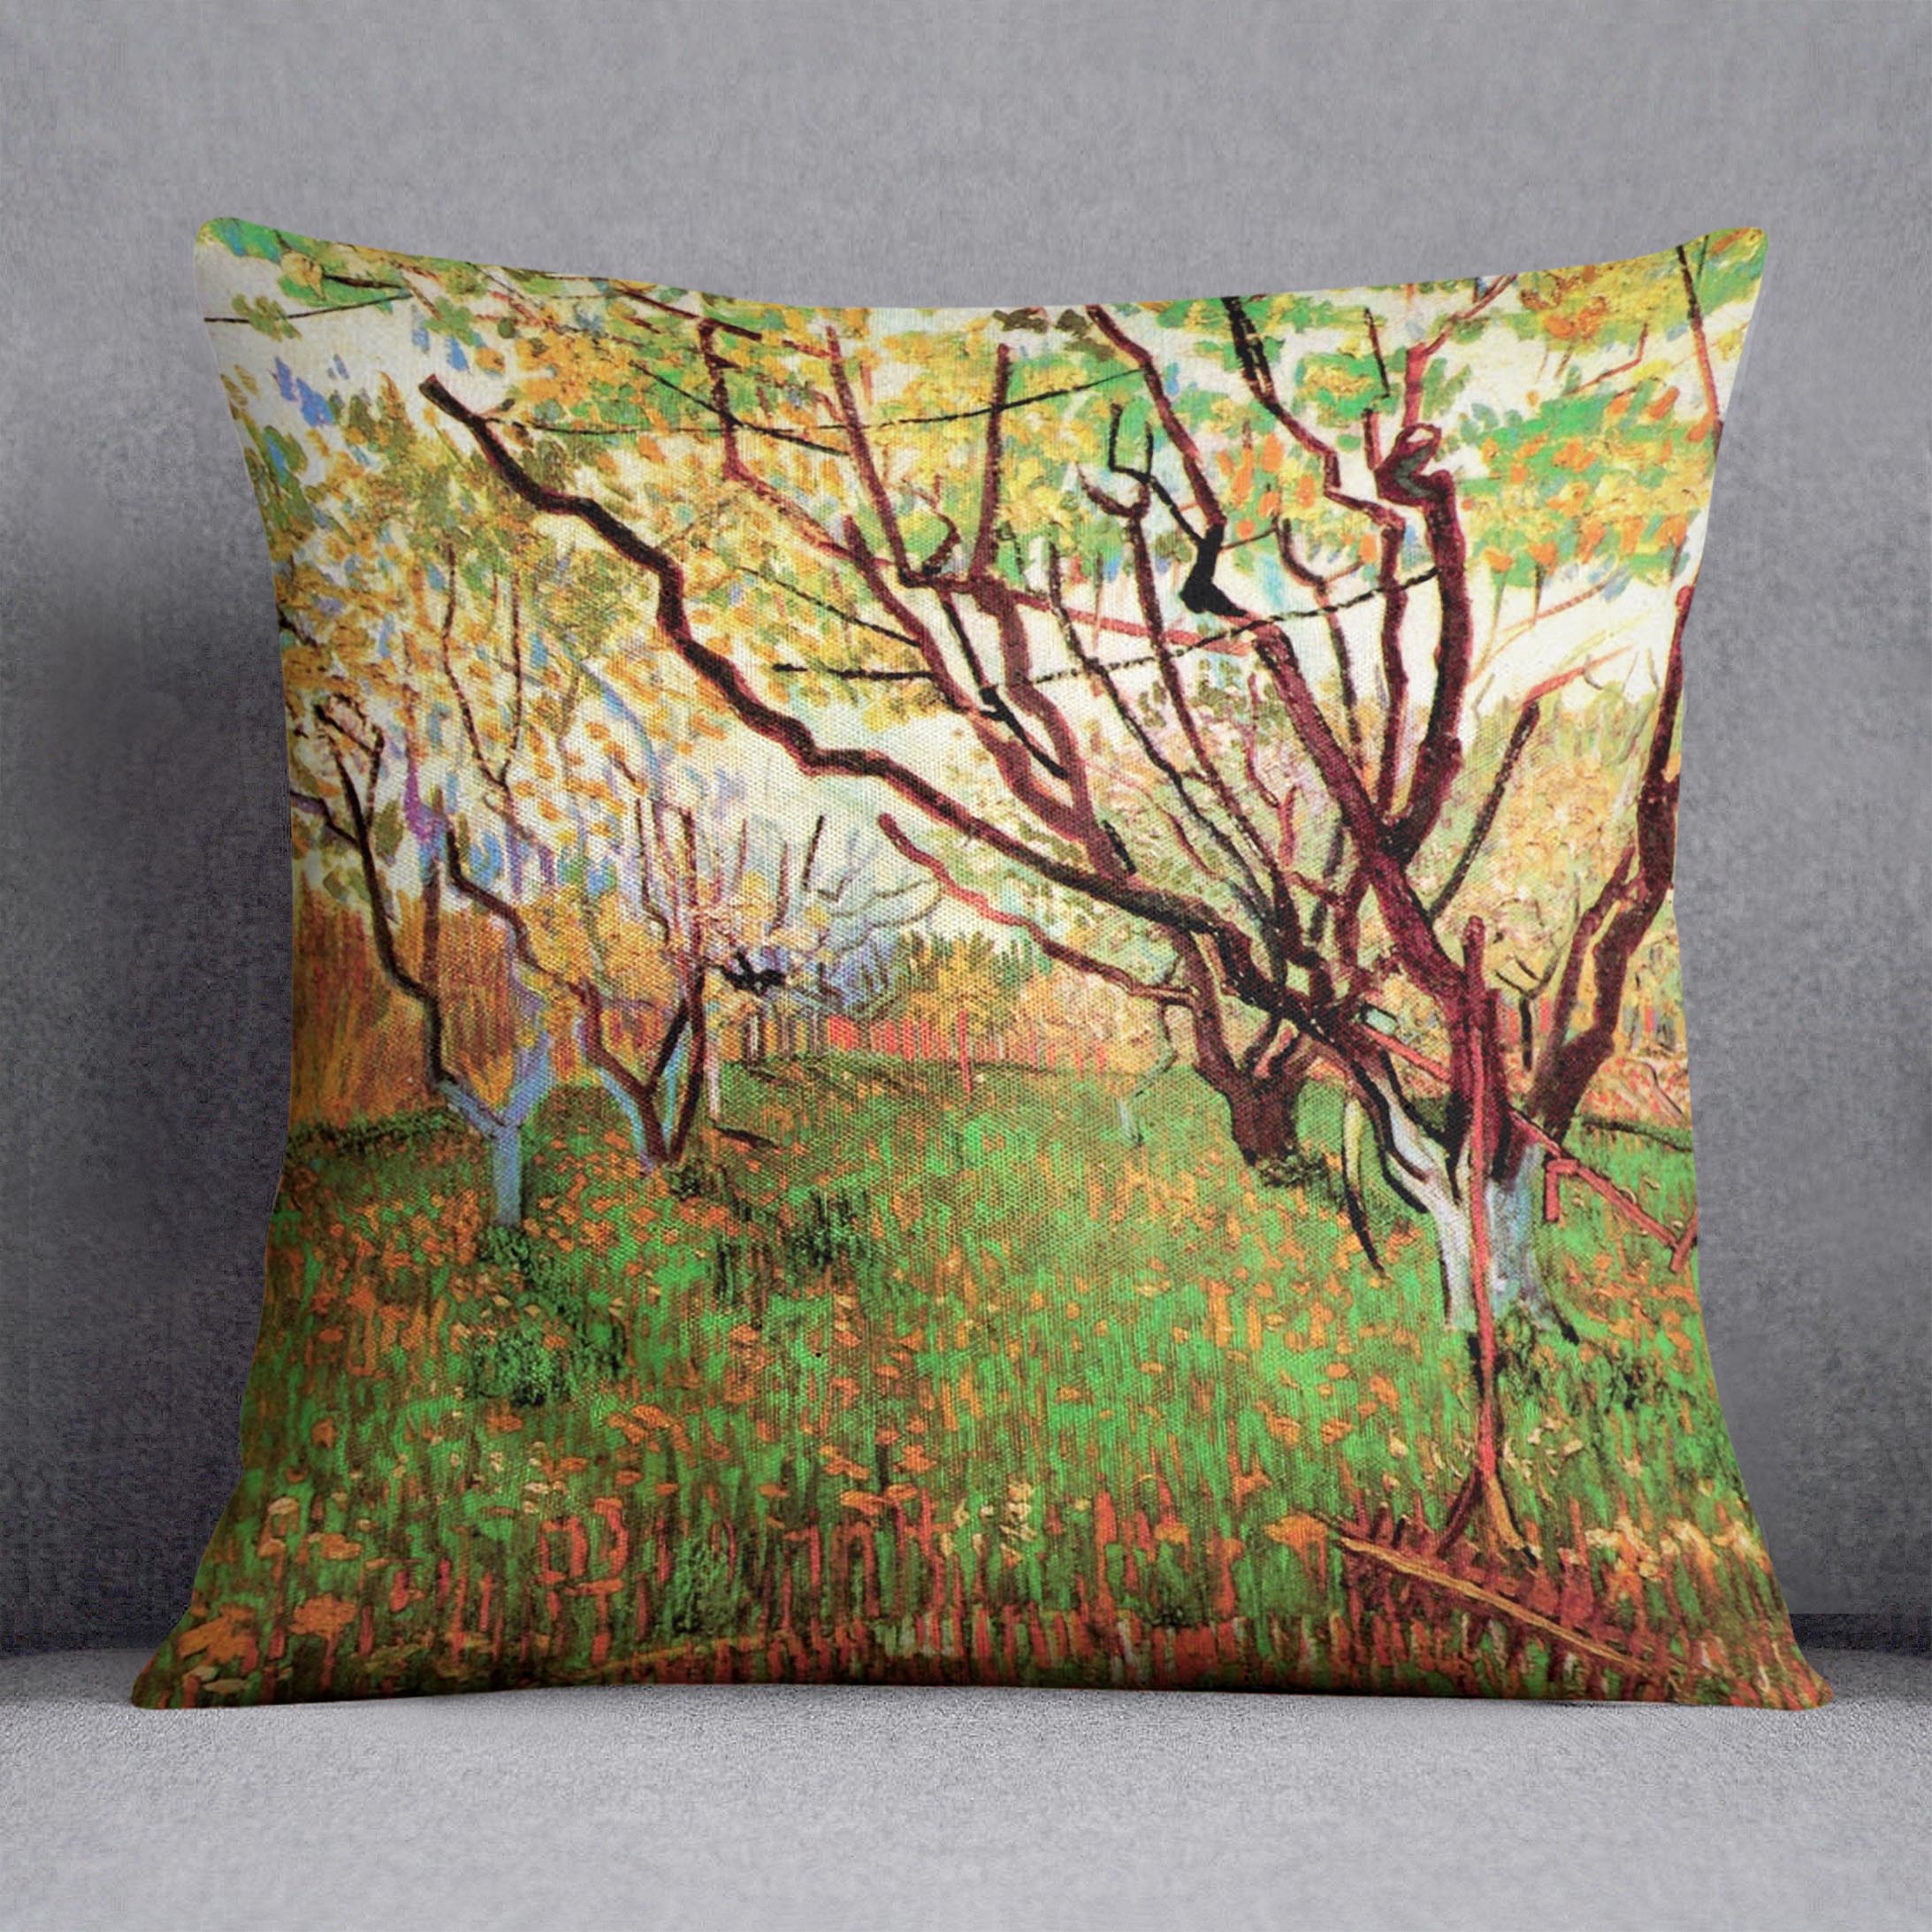 Orchard in Blossom by Van Gogh Cushion